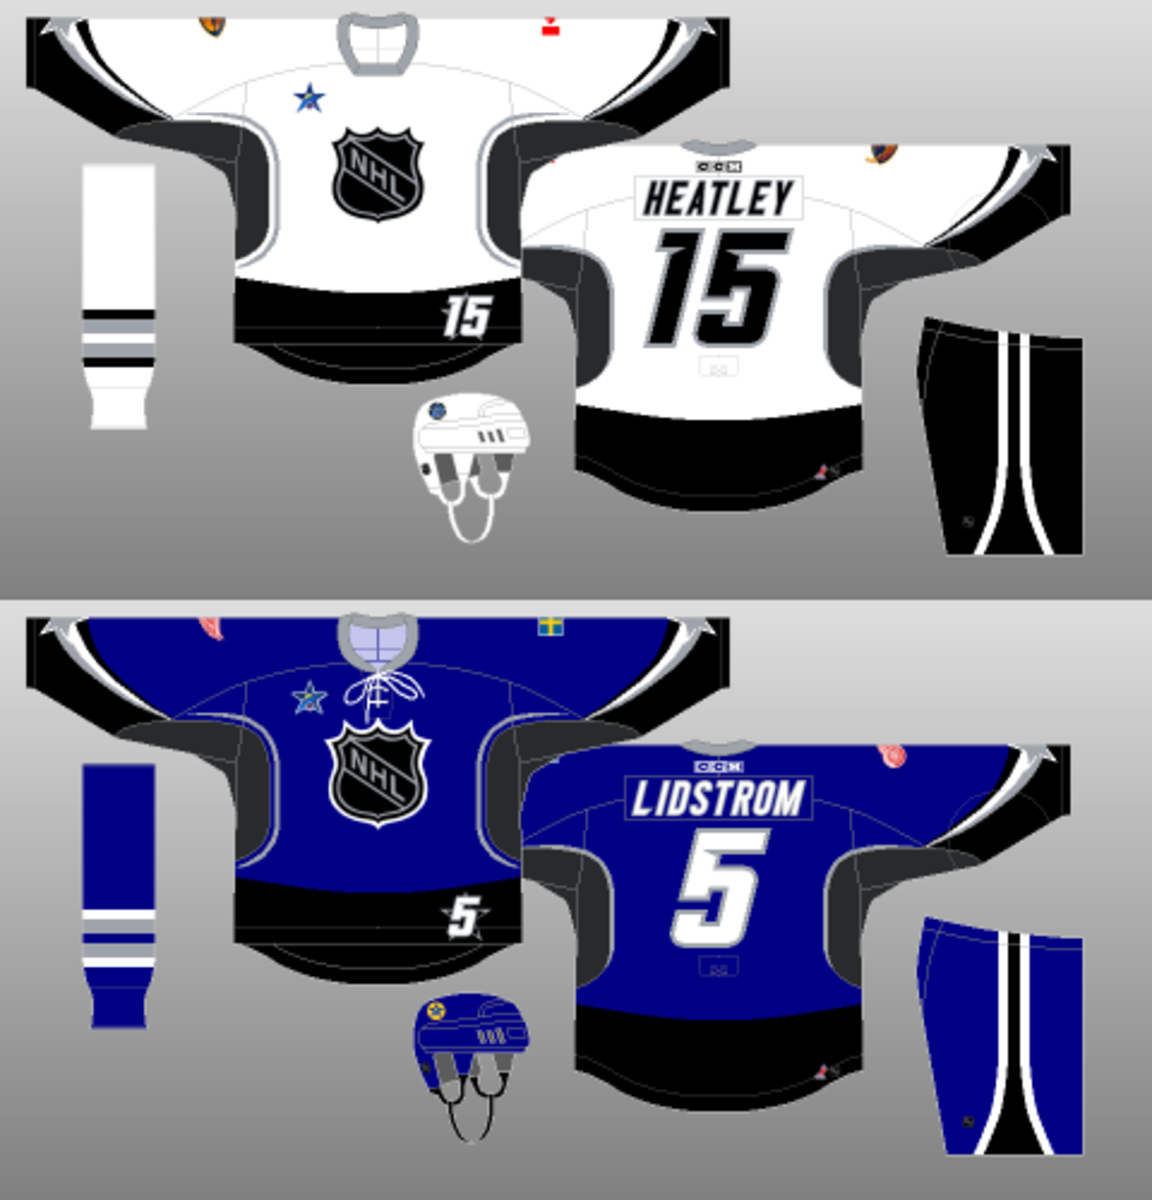 game jersey concepts